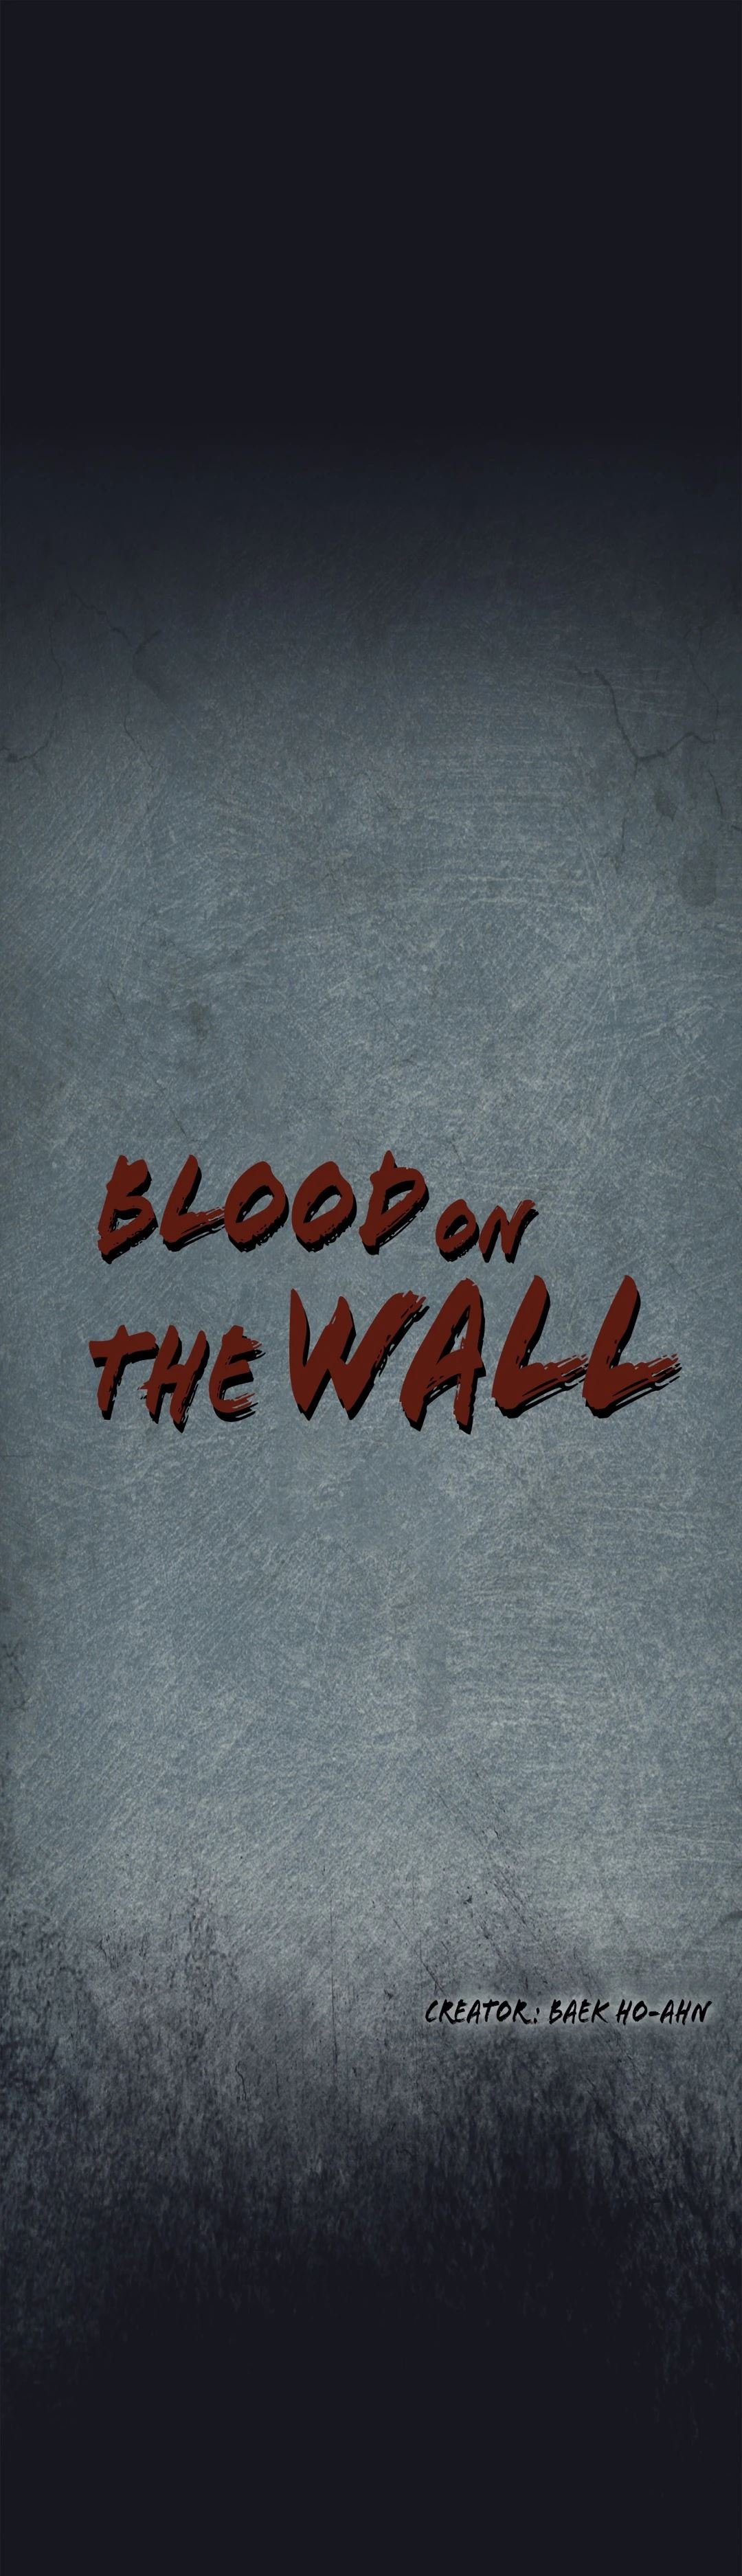 blood-on-the-wall-chap-21-0